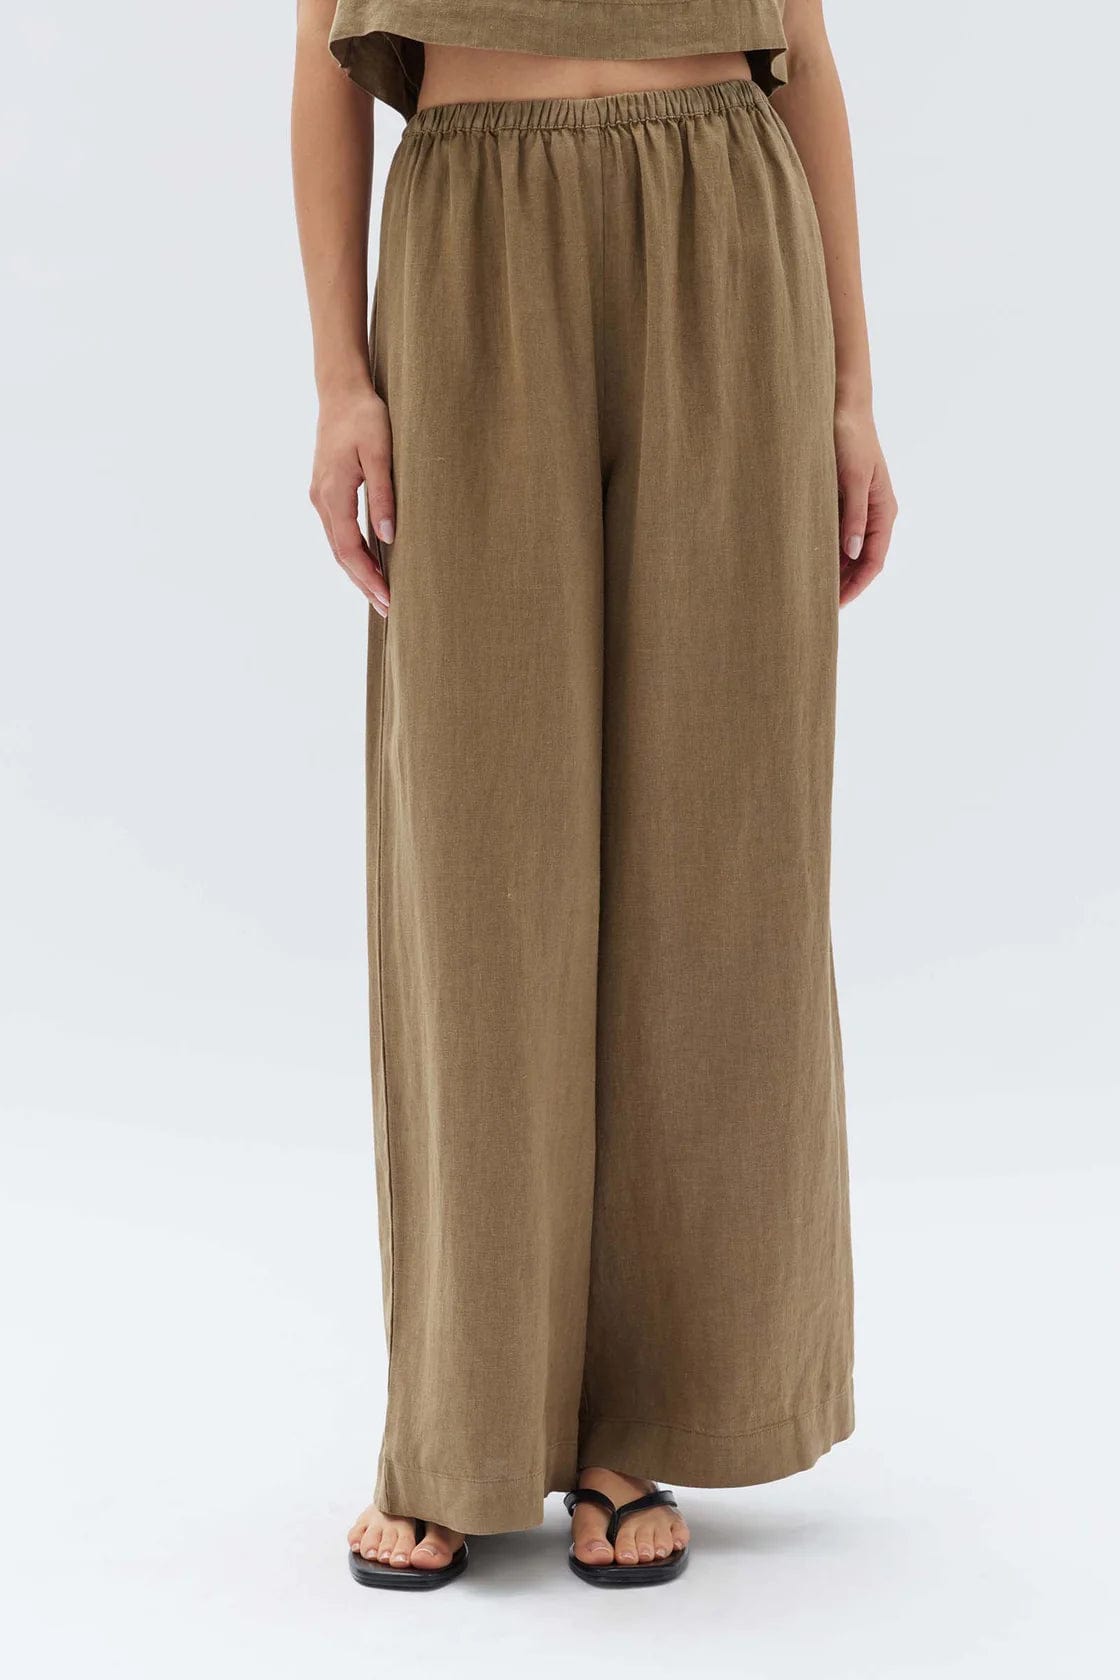 Assembly Label Pants - Casual Assembly Label | Stella Linen Pant - Pea